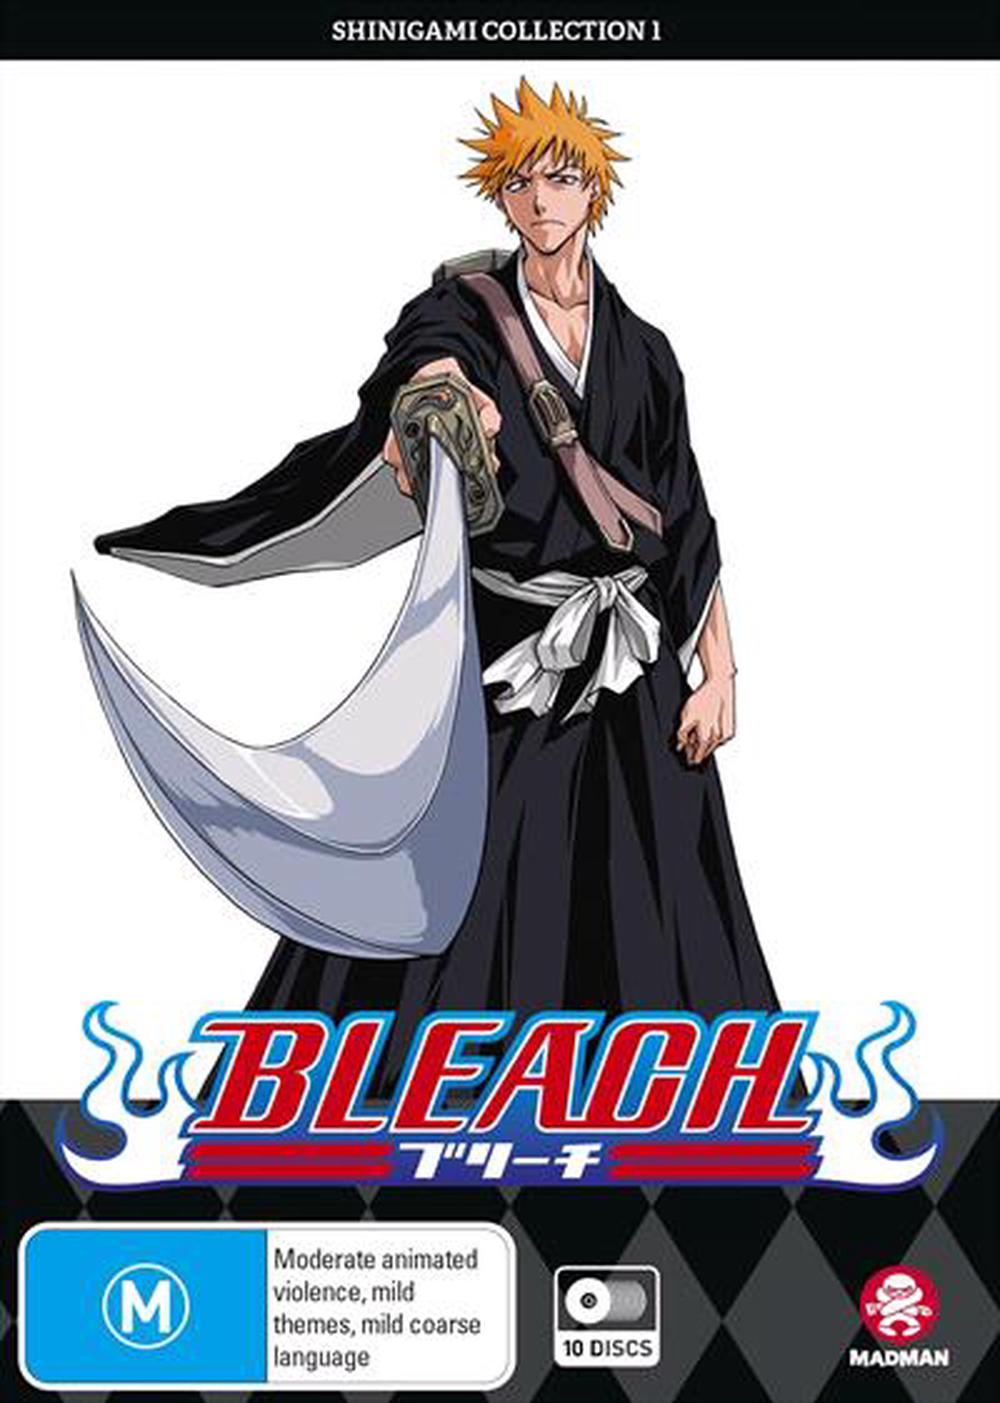 Bleach Shinigami Collection 1 Eps 1 41 Dvd Buy Online At The Nile